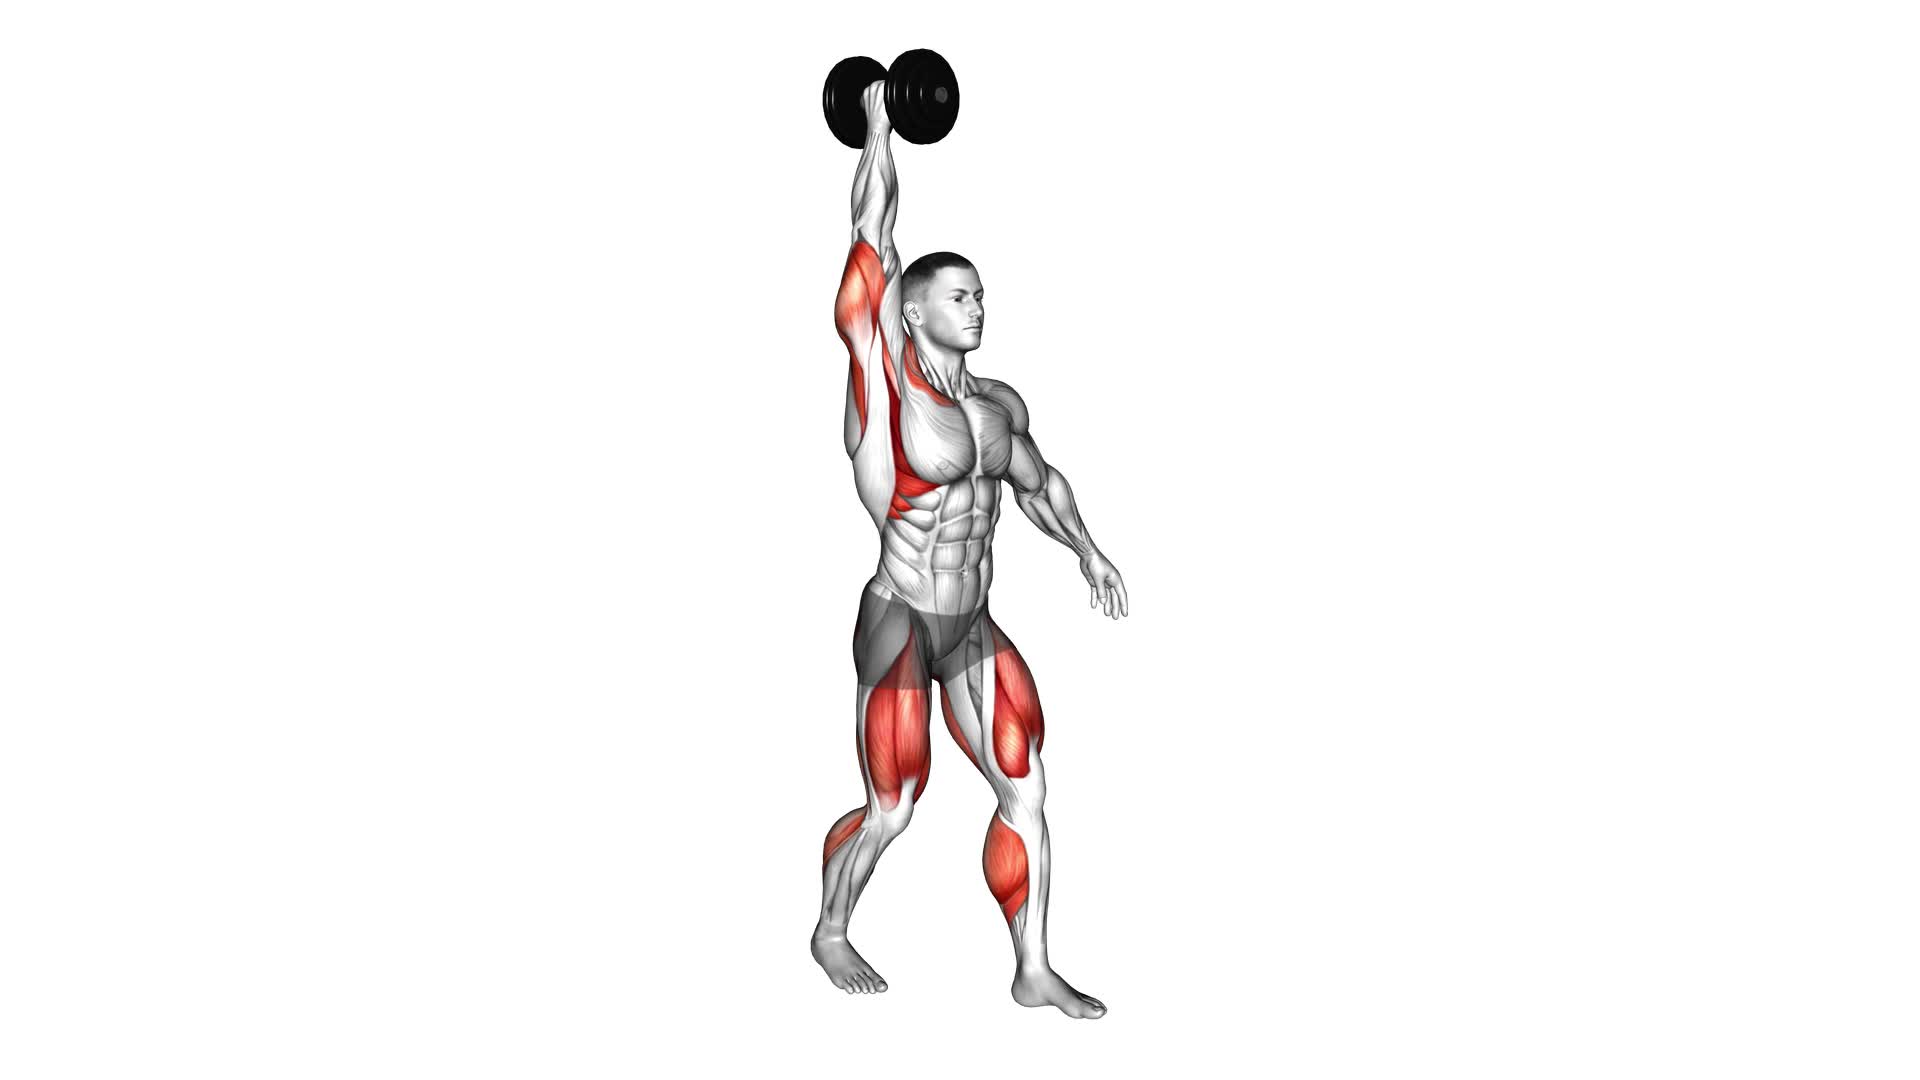 Dumbbell Single Arm Overhead Carry - Video Exercise Guide & Tips